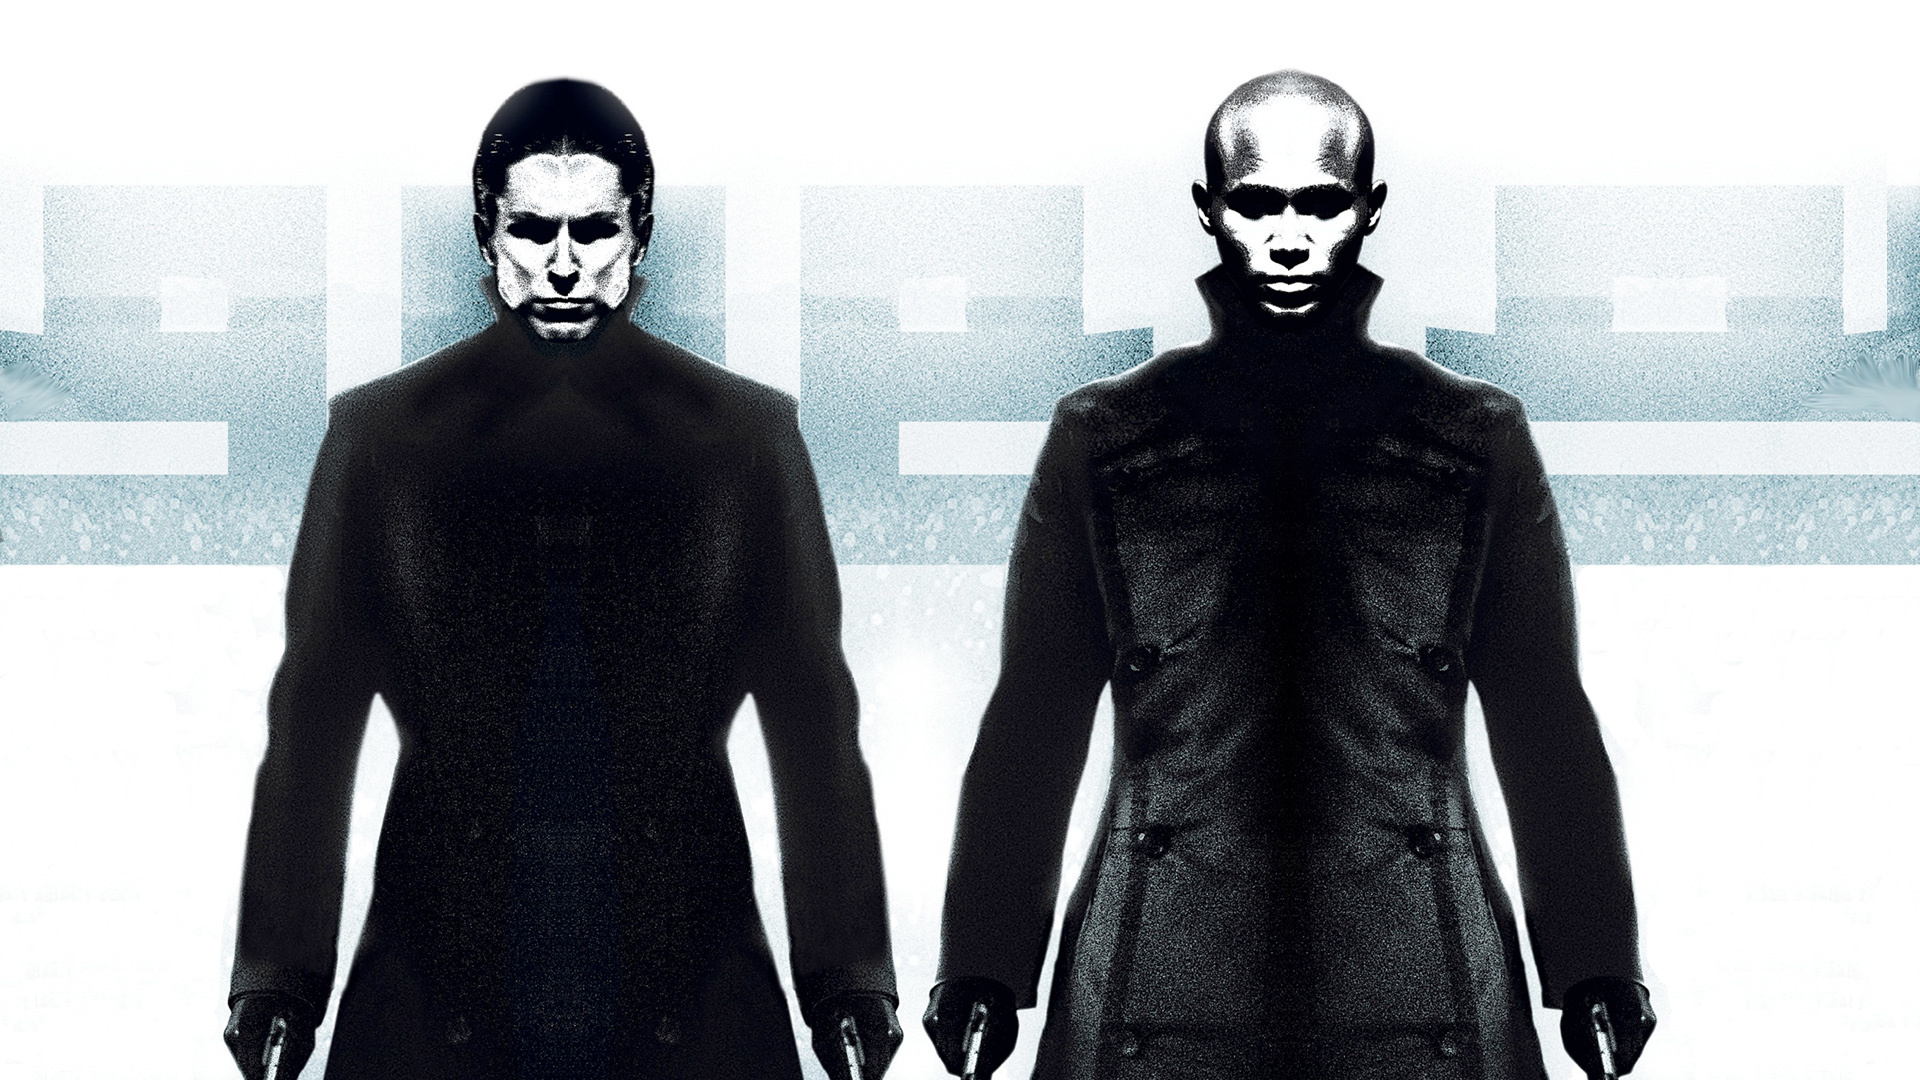 Equilibrium wallpapers, Dystopian world, Striking visuals, Action-packed thriller, 1920x1080 Full HD Desktop